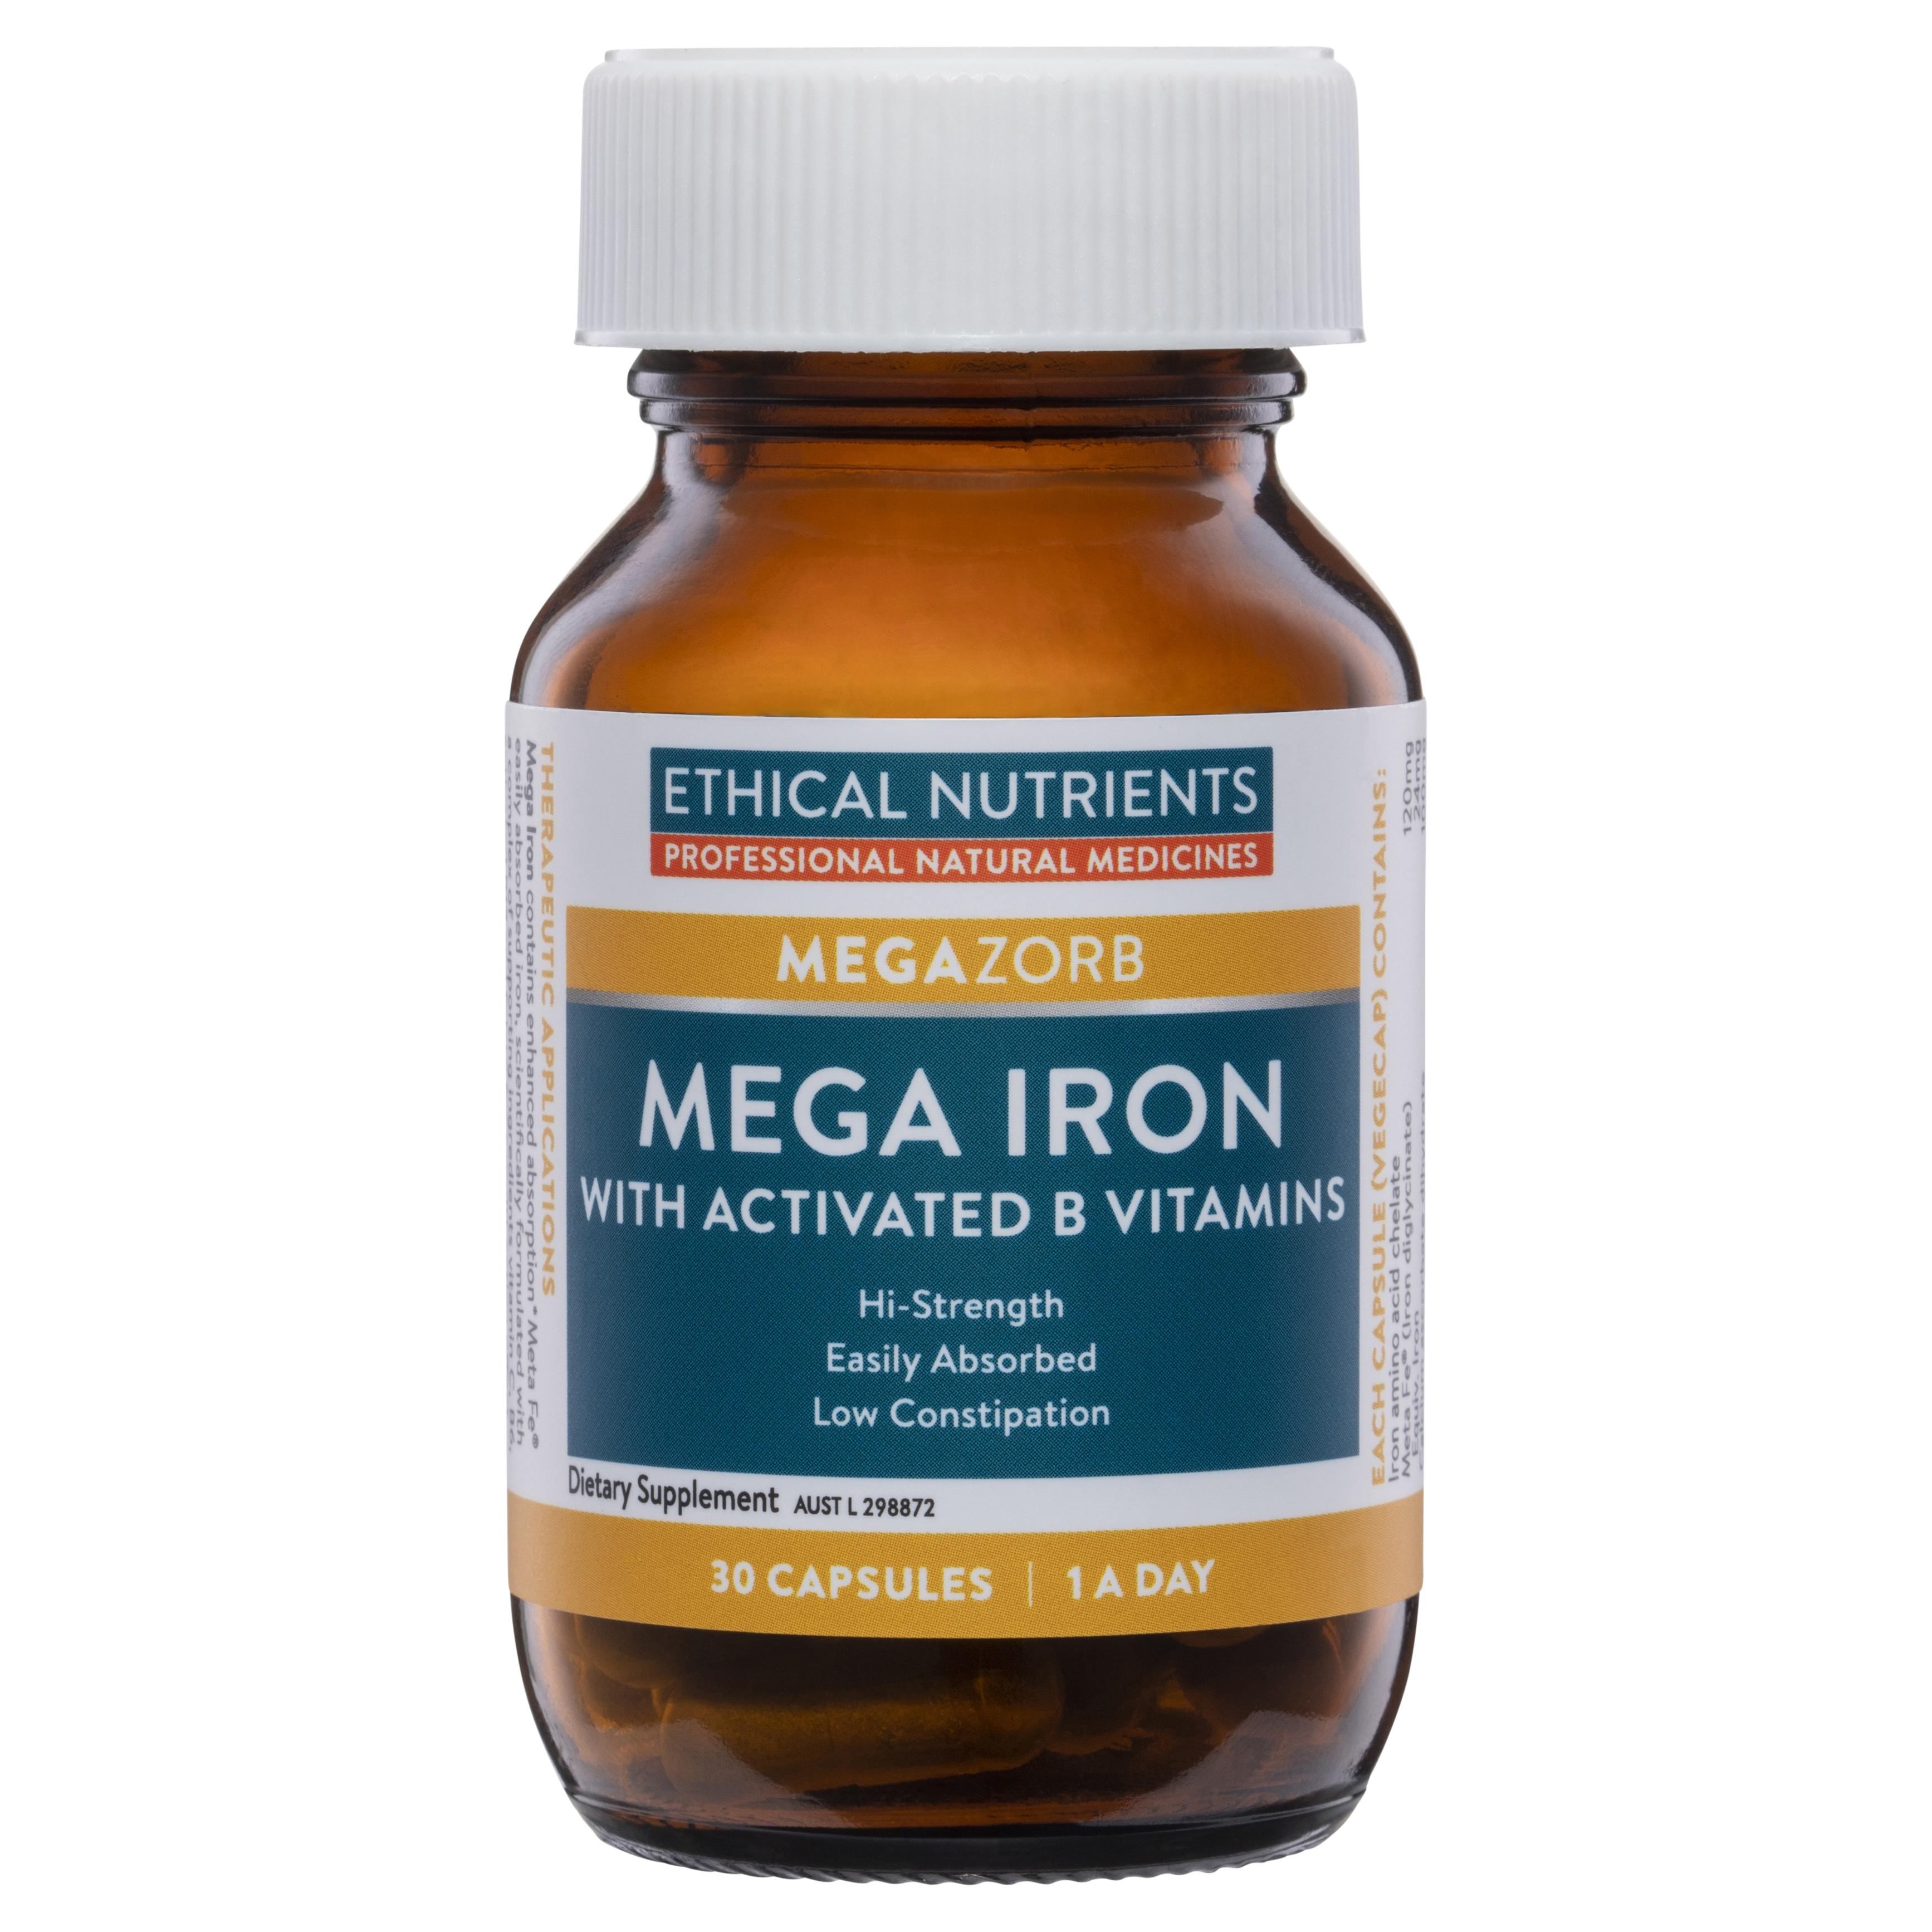 Ethical Nutrients MEGAZORB Mega Iron with Activated B